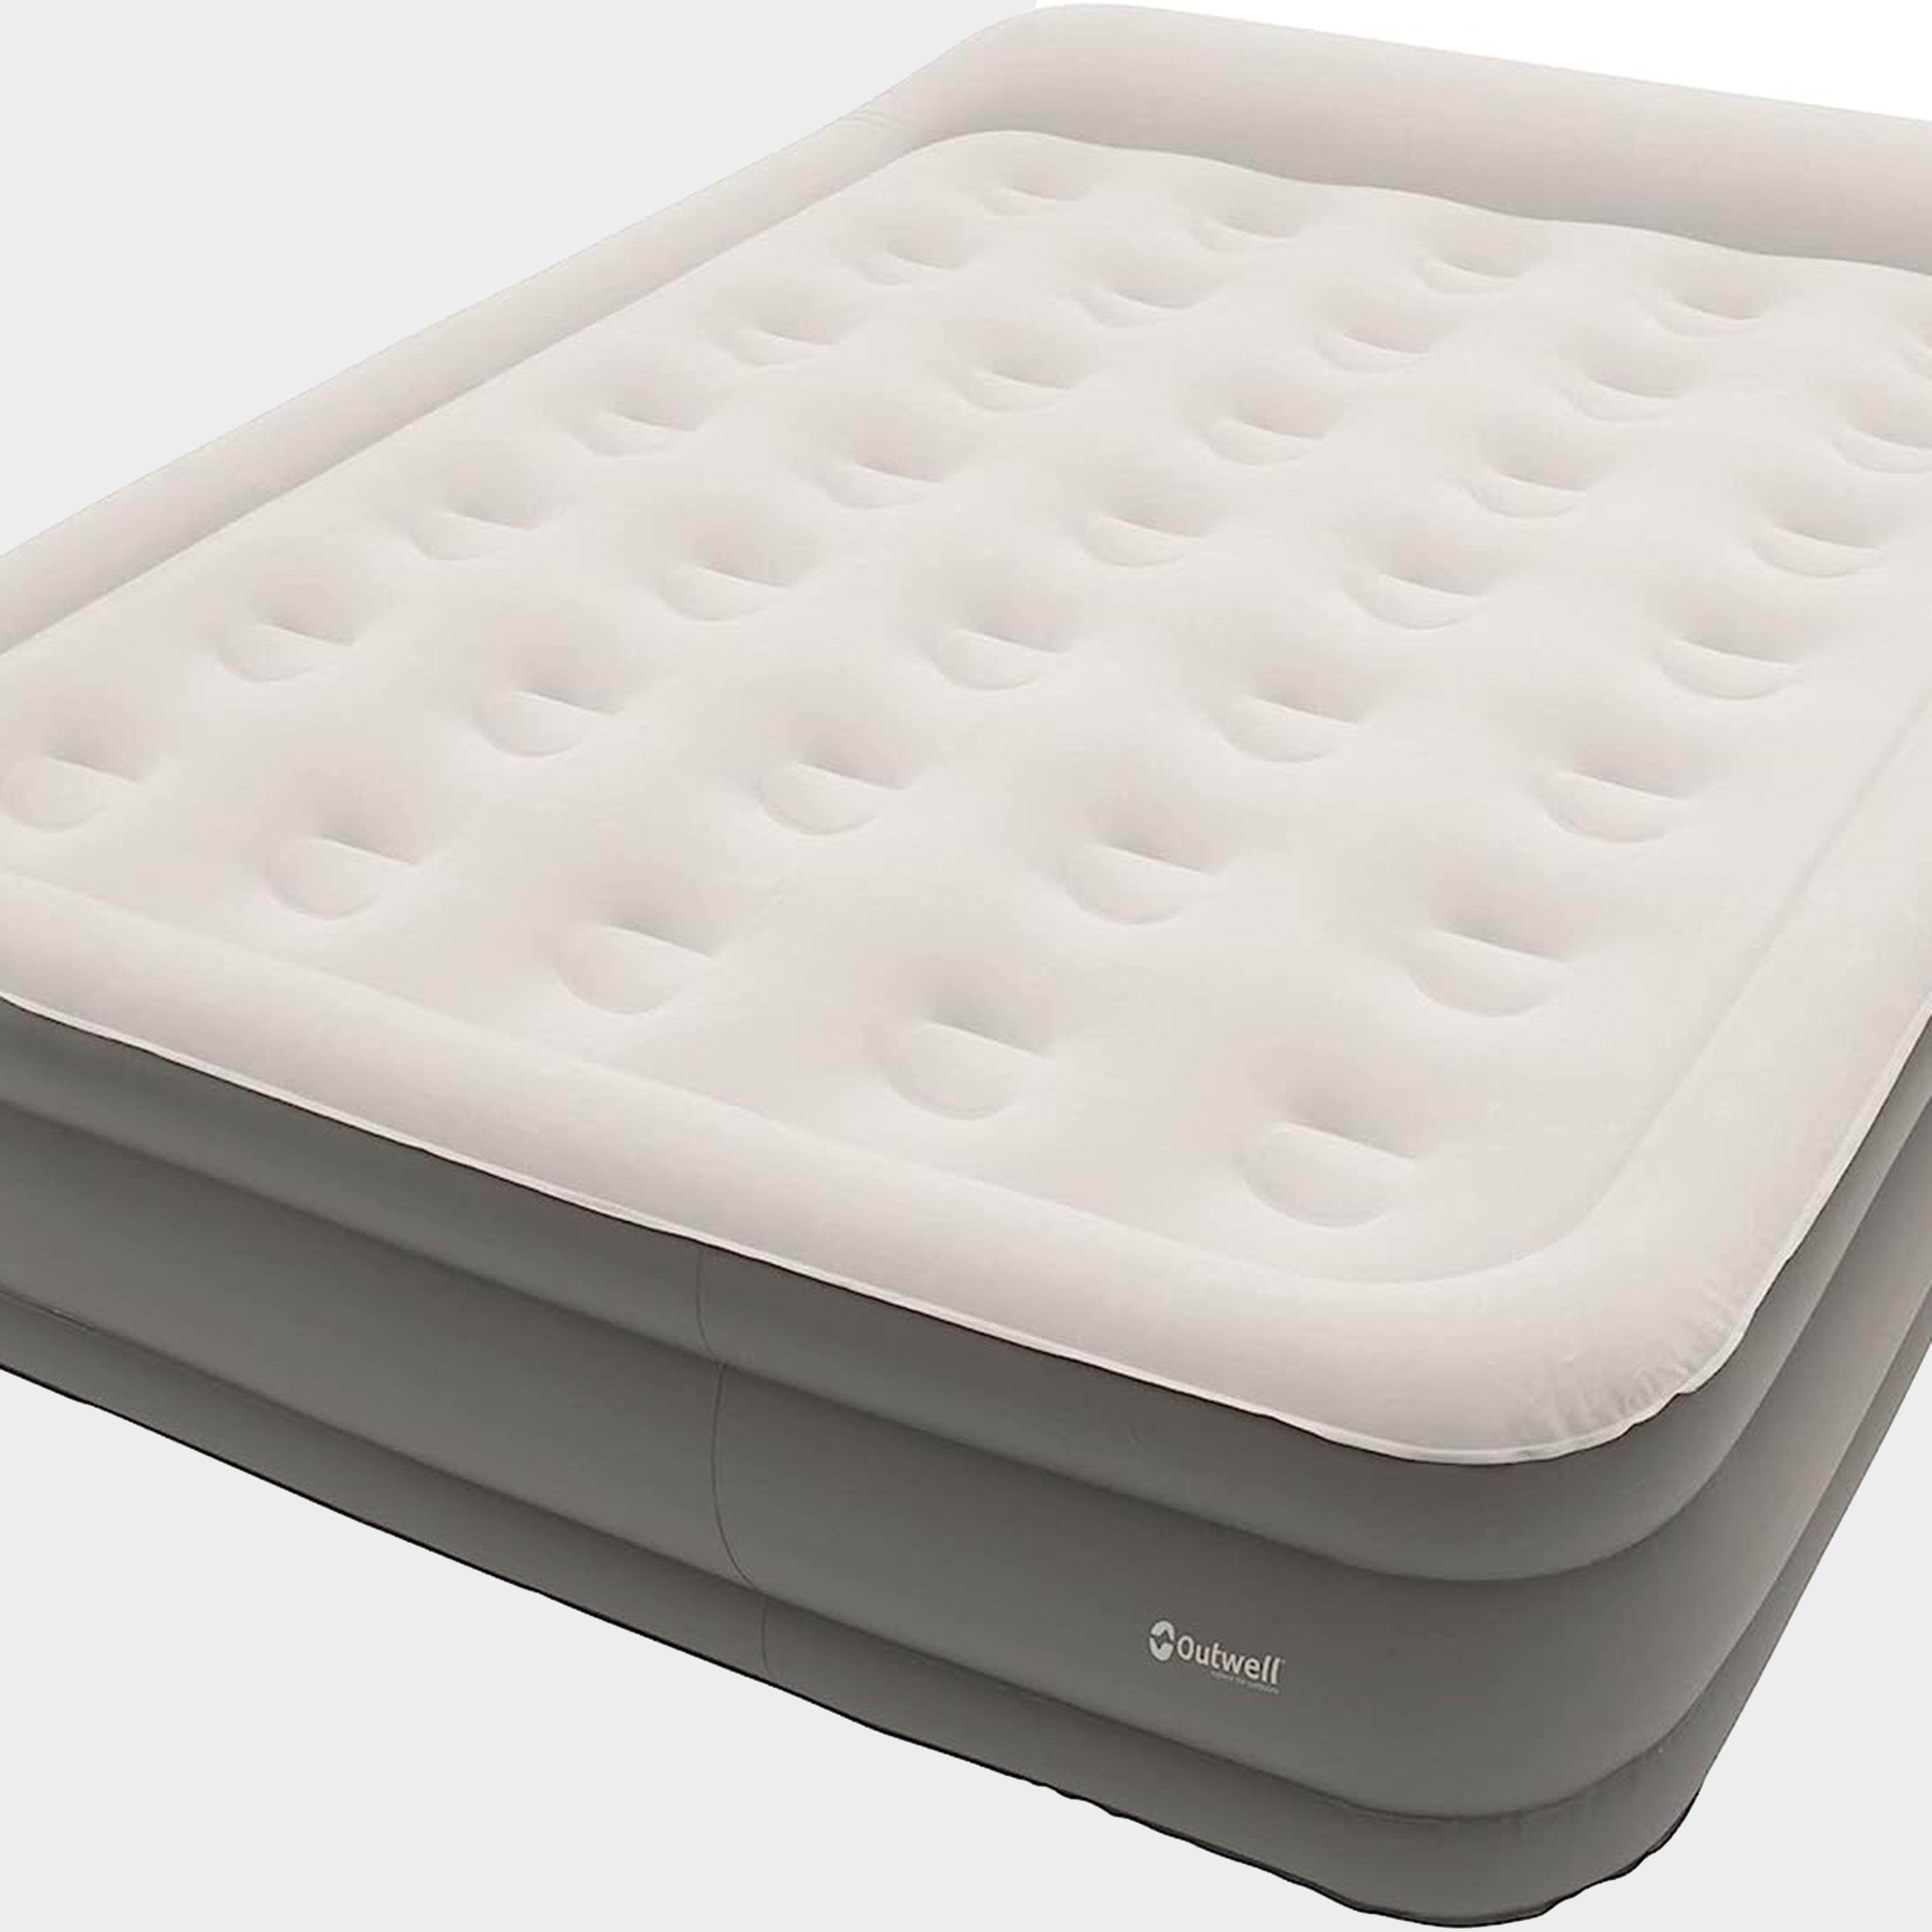  Outwell Flock Superior Double Air Bed, Grey